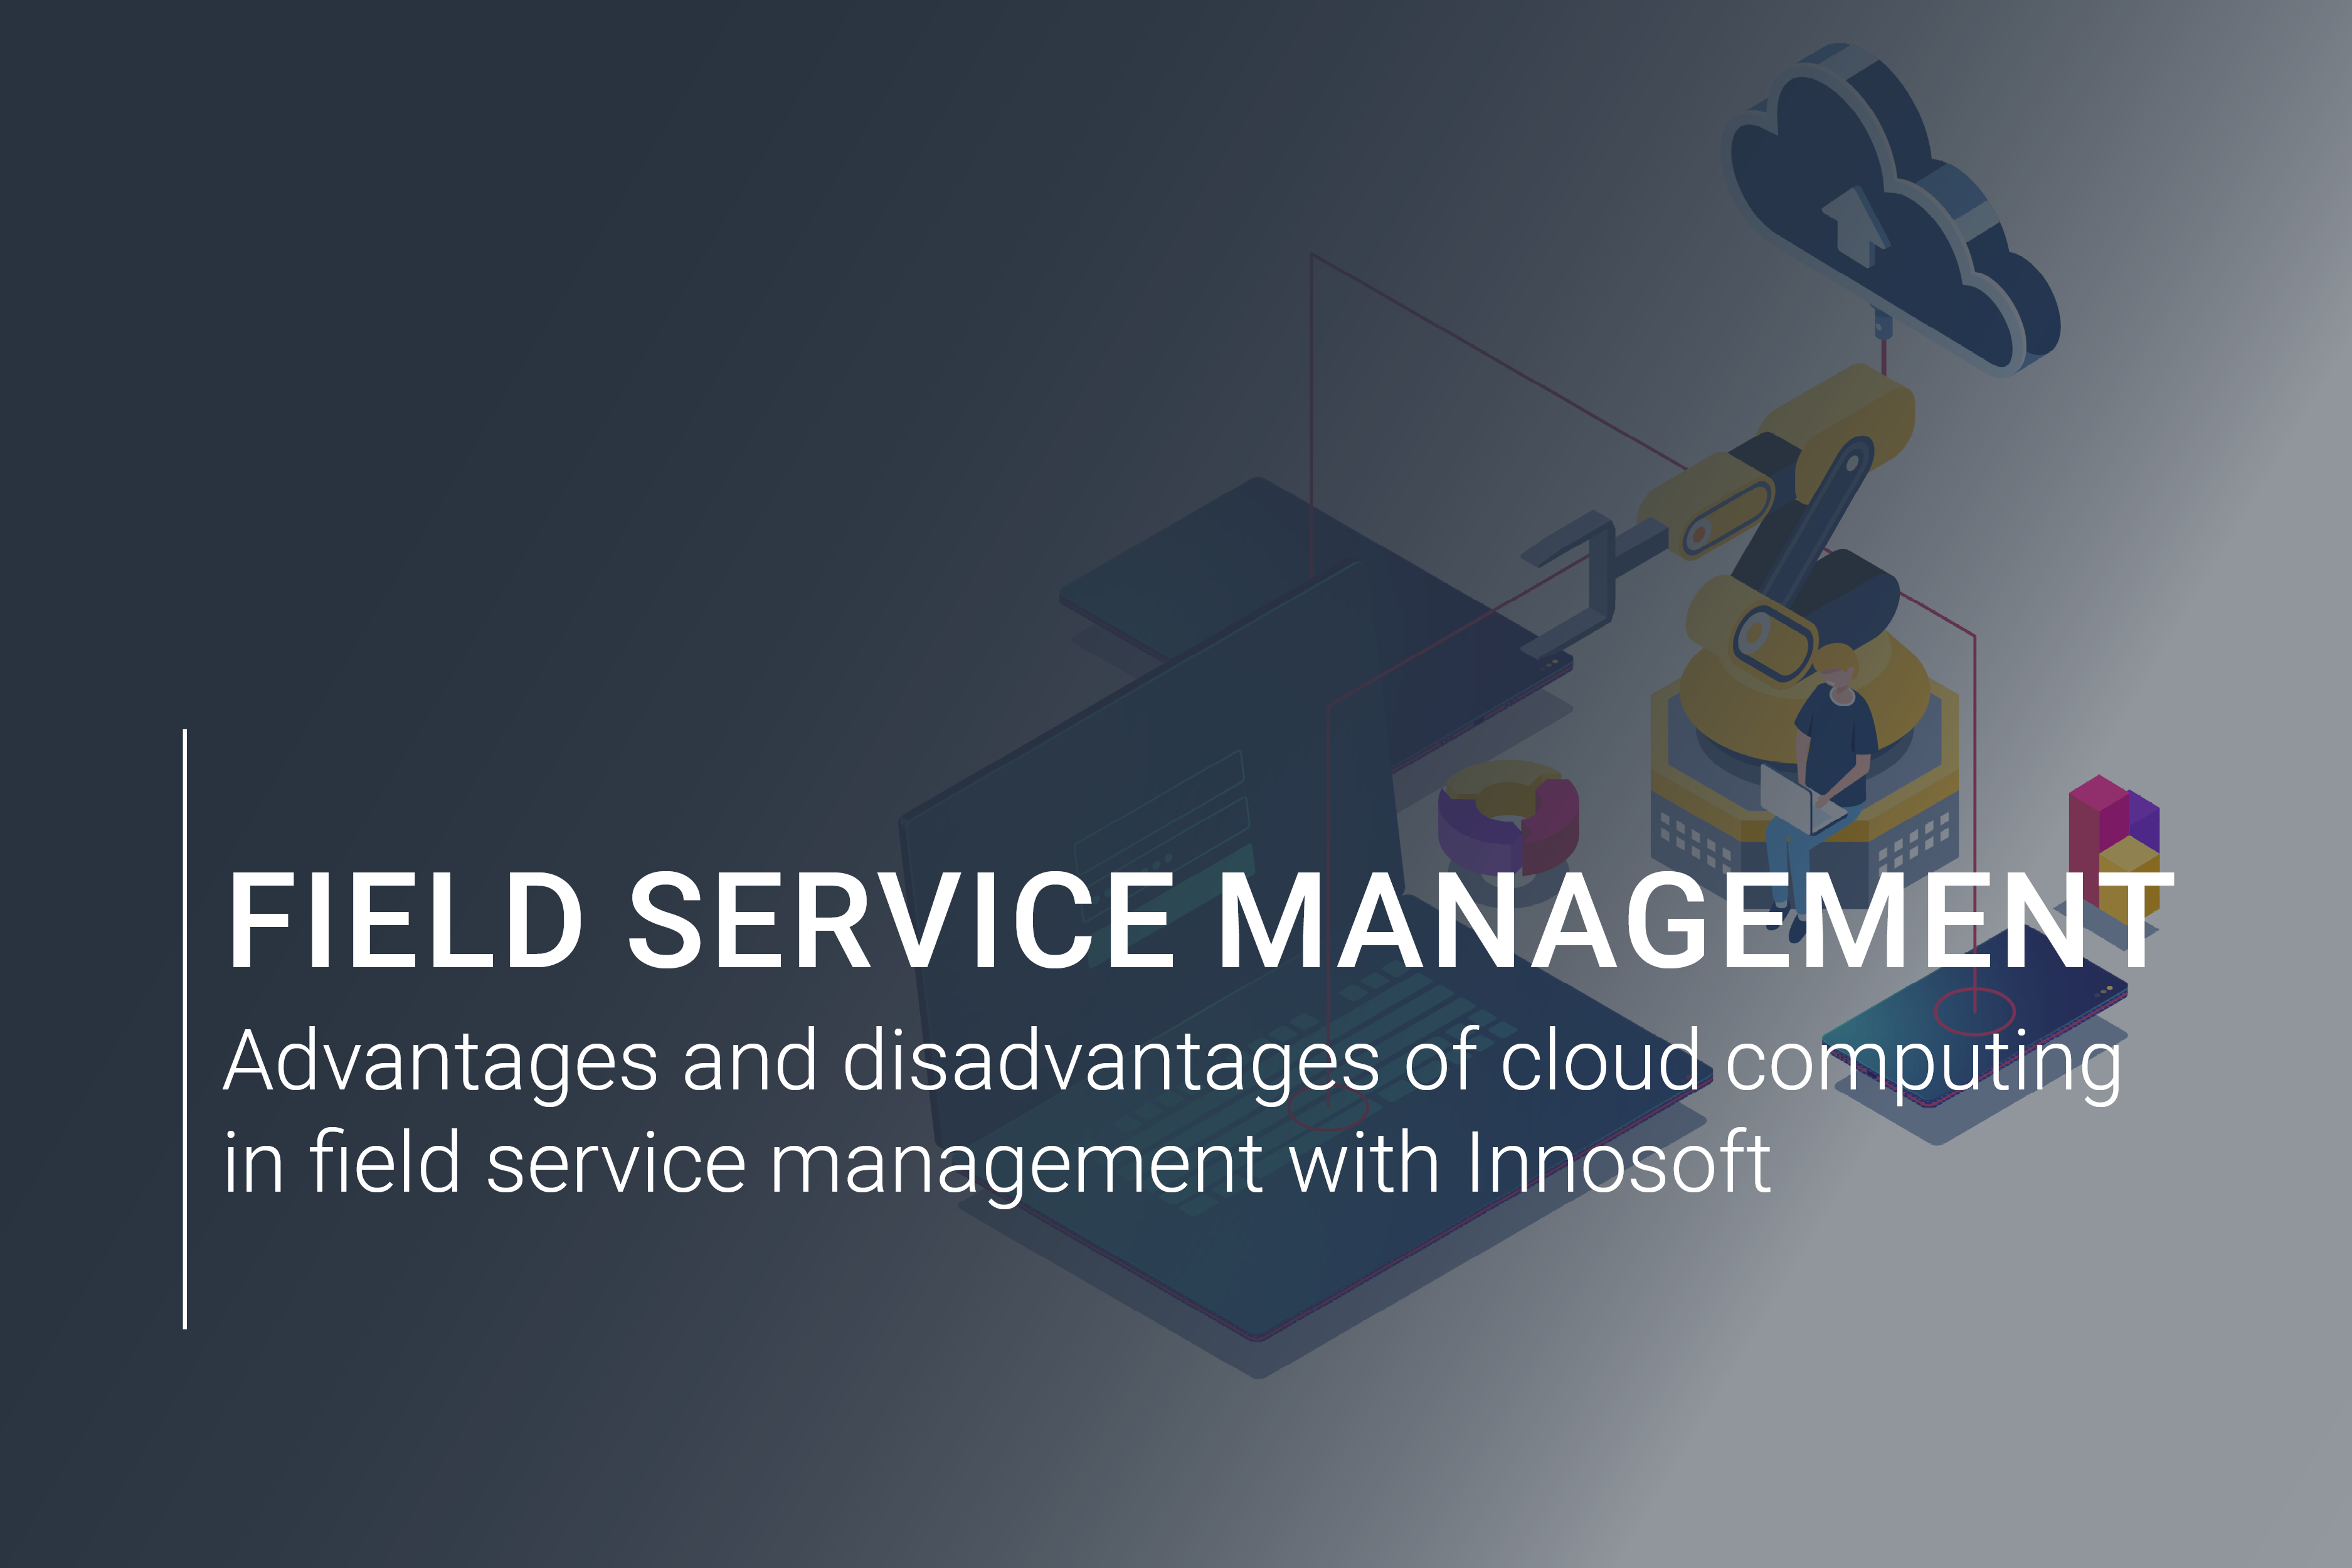 Advantages and disadvantages of cloud comuting in field service management